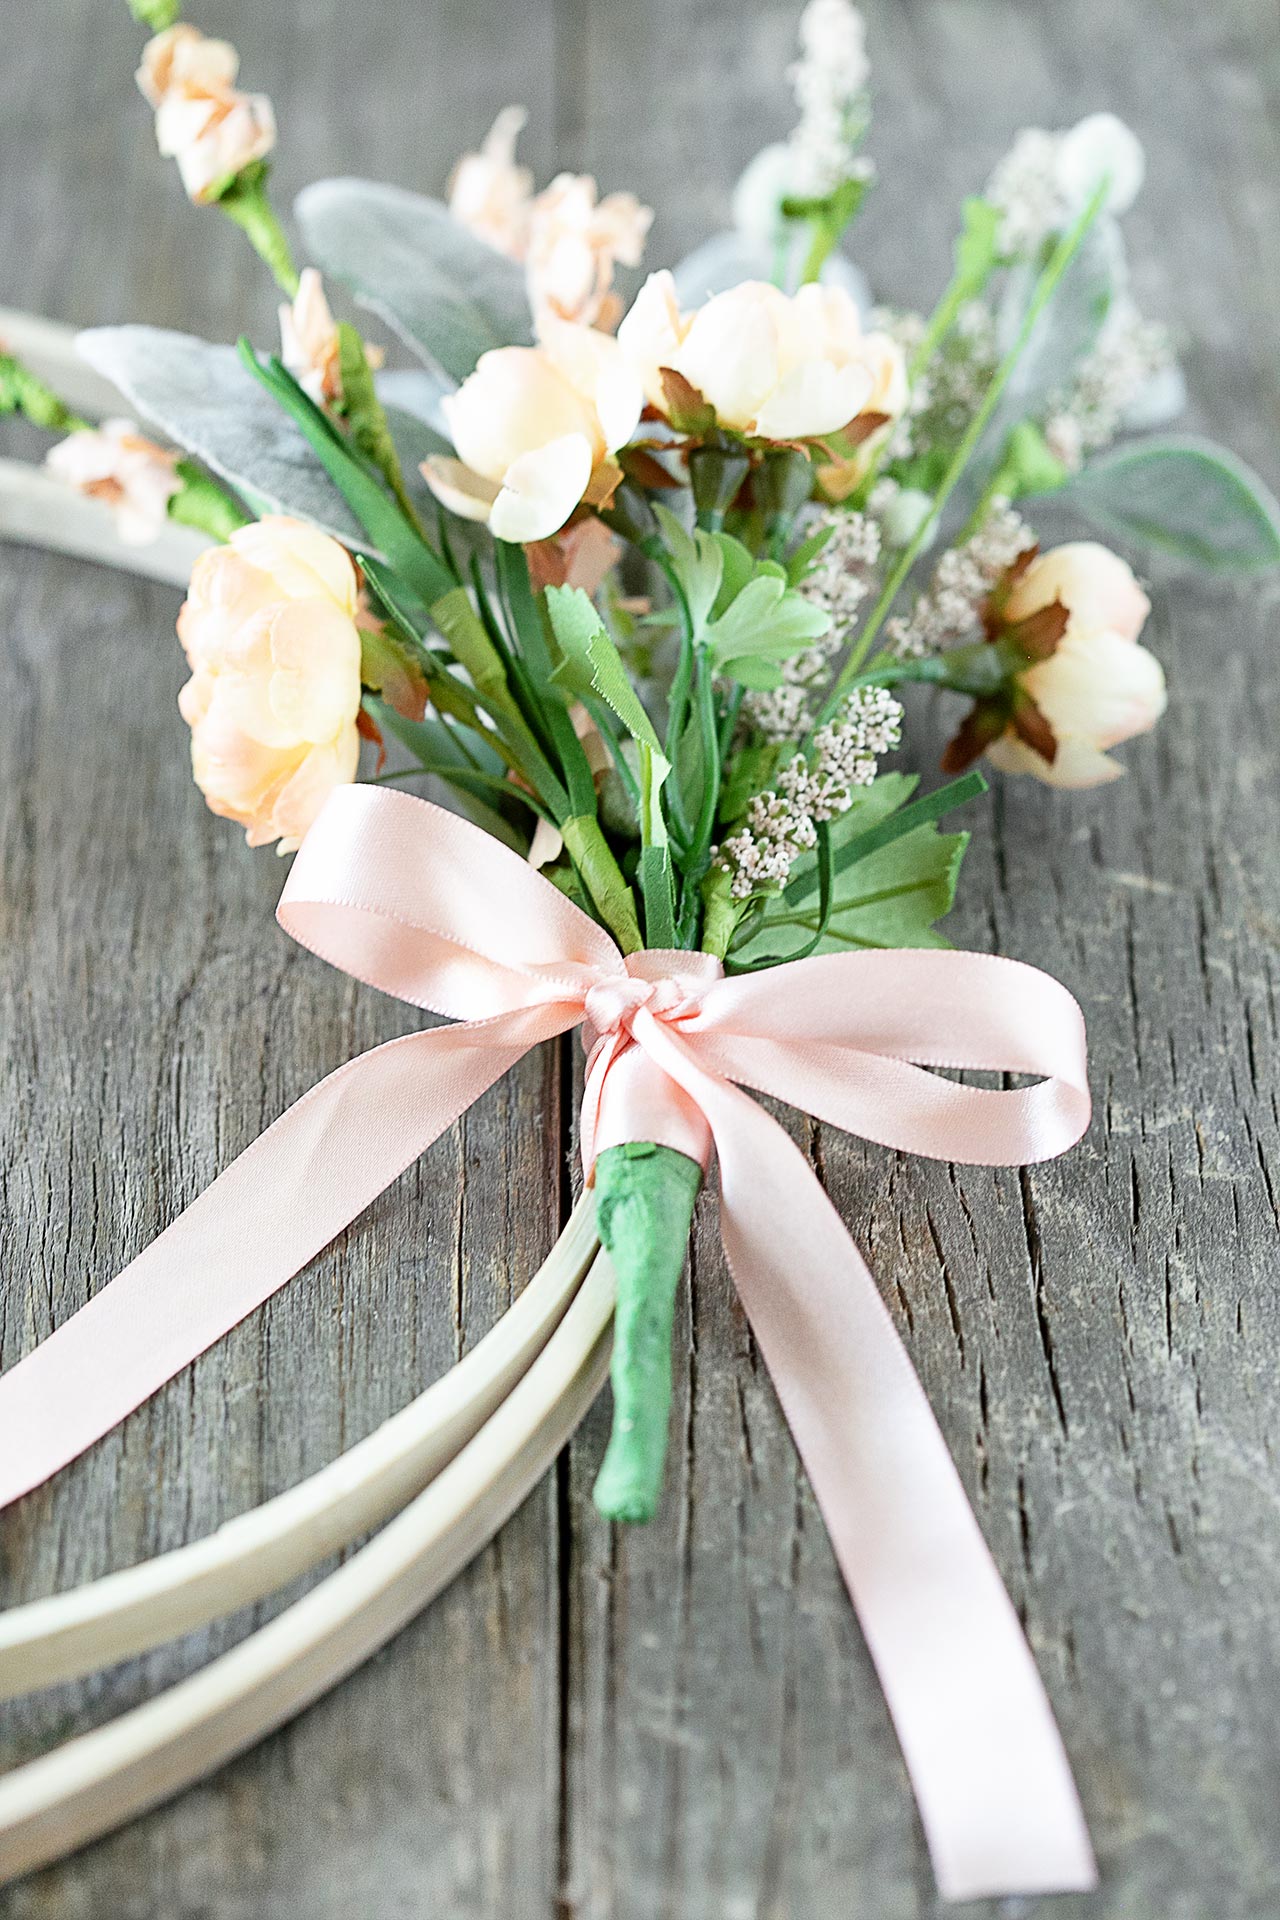 Add Ribbon to Finalize Spring Hoop Wreath